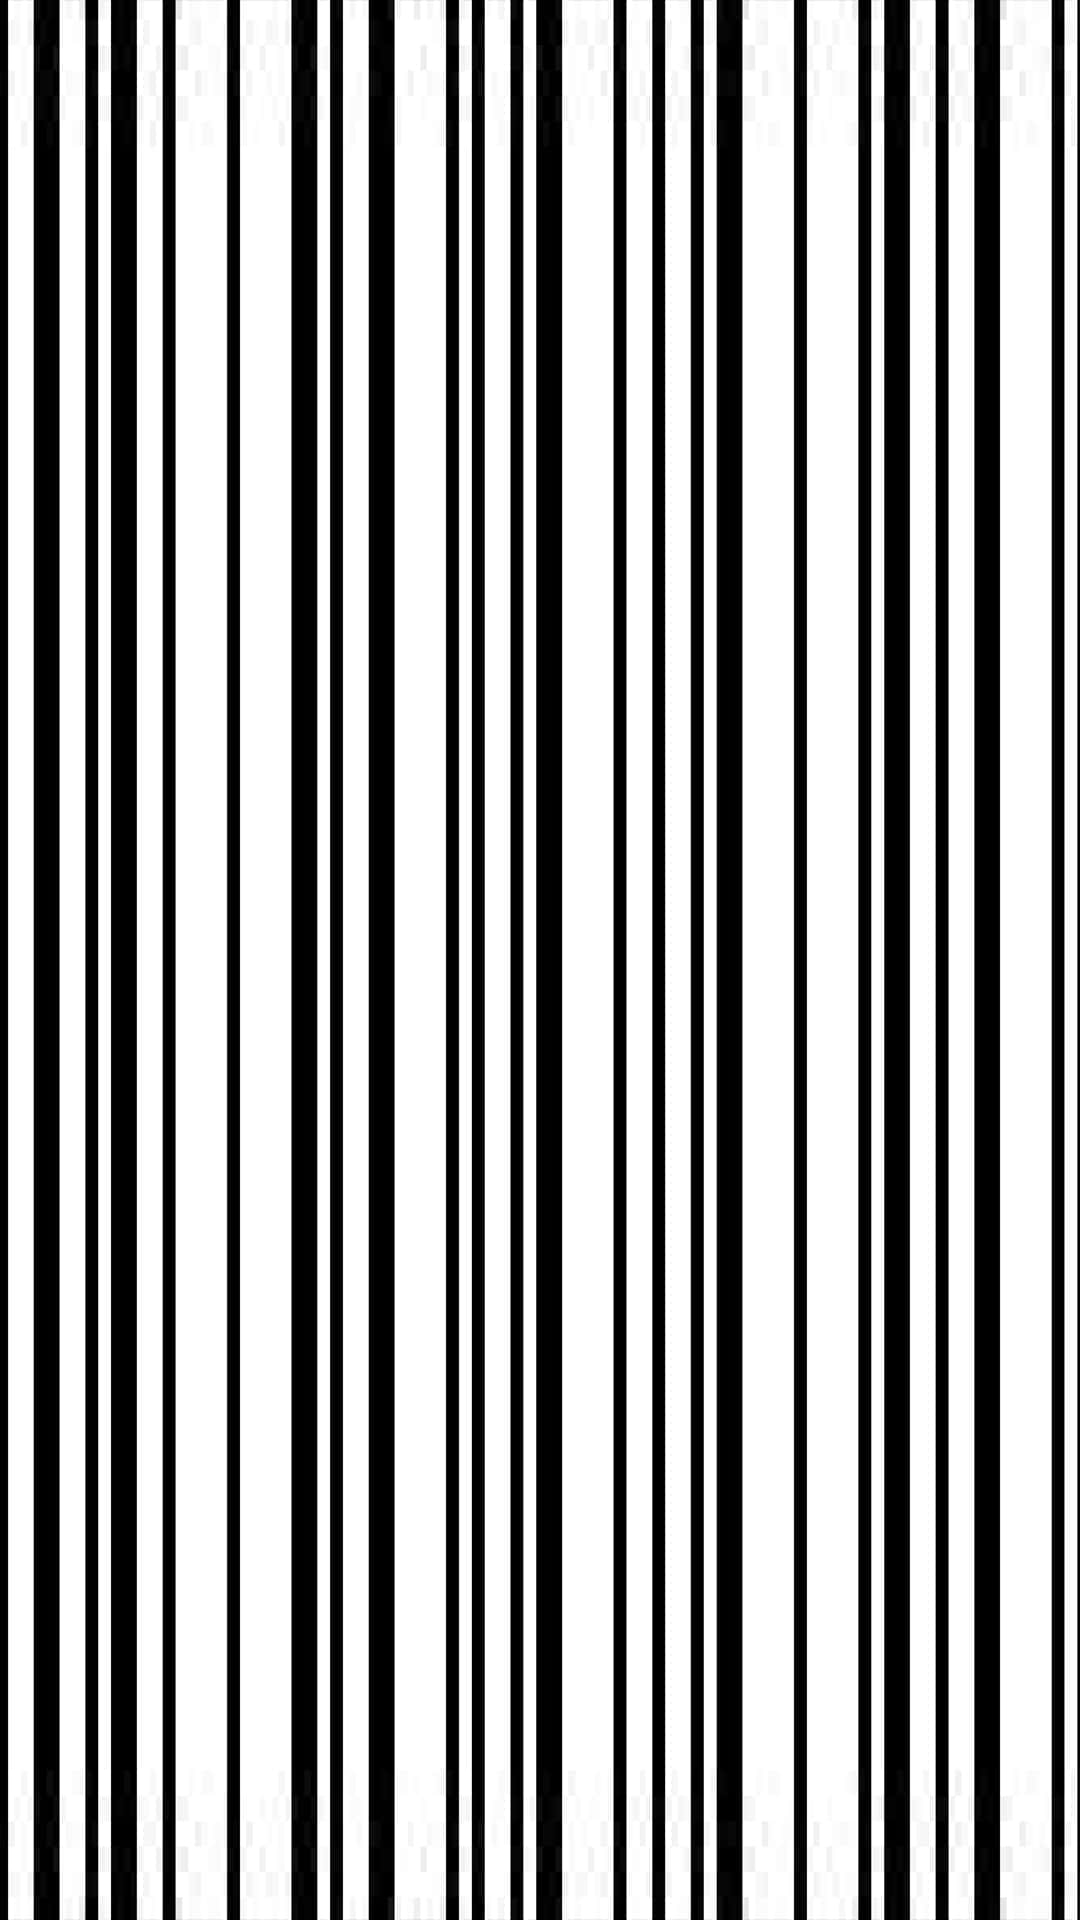 “Barcode Scanning at its Best” Wallpaper